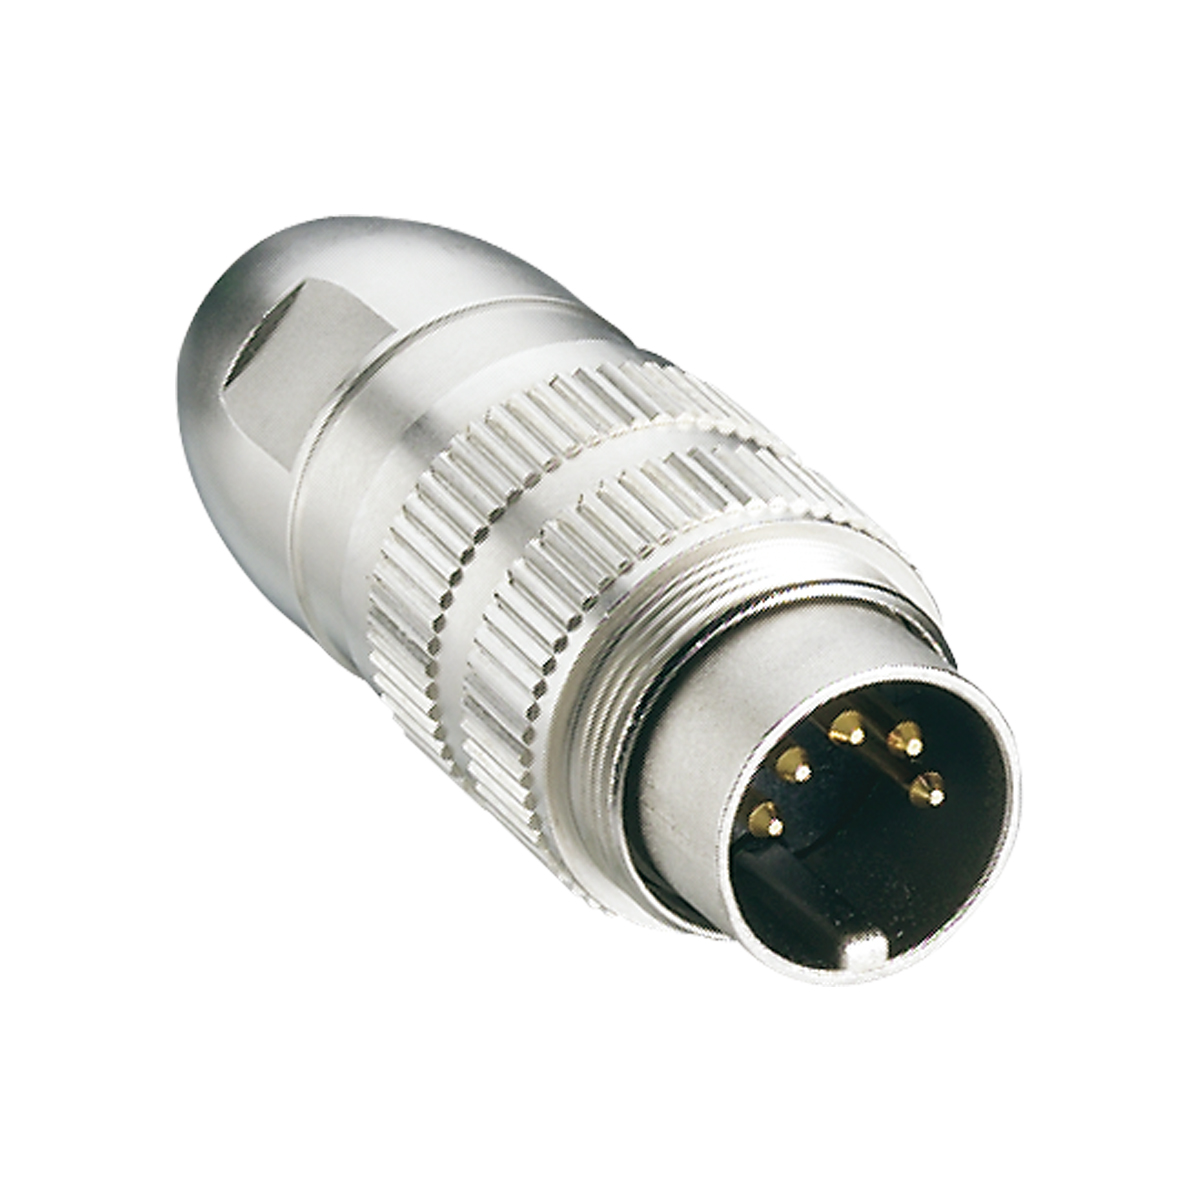 Lumberg: 331 (Series 03 | Circular connectors with threaded joint M16 acc. to IEC 61076-2-106, IP40/IP68)